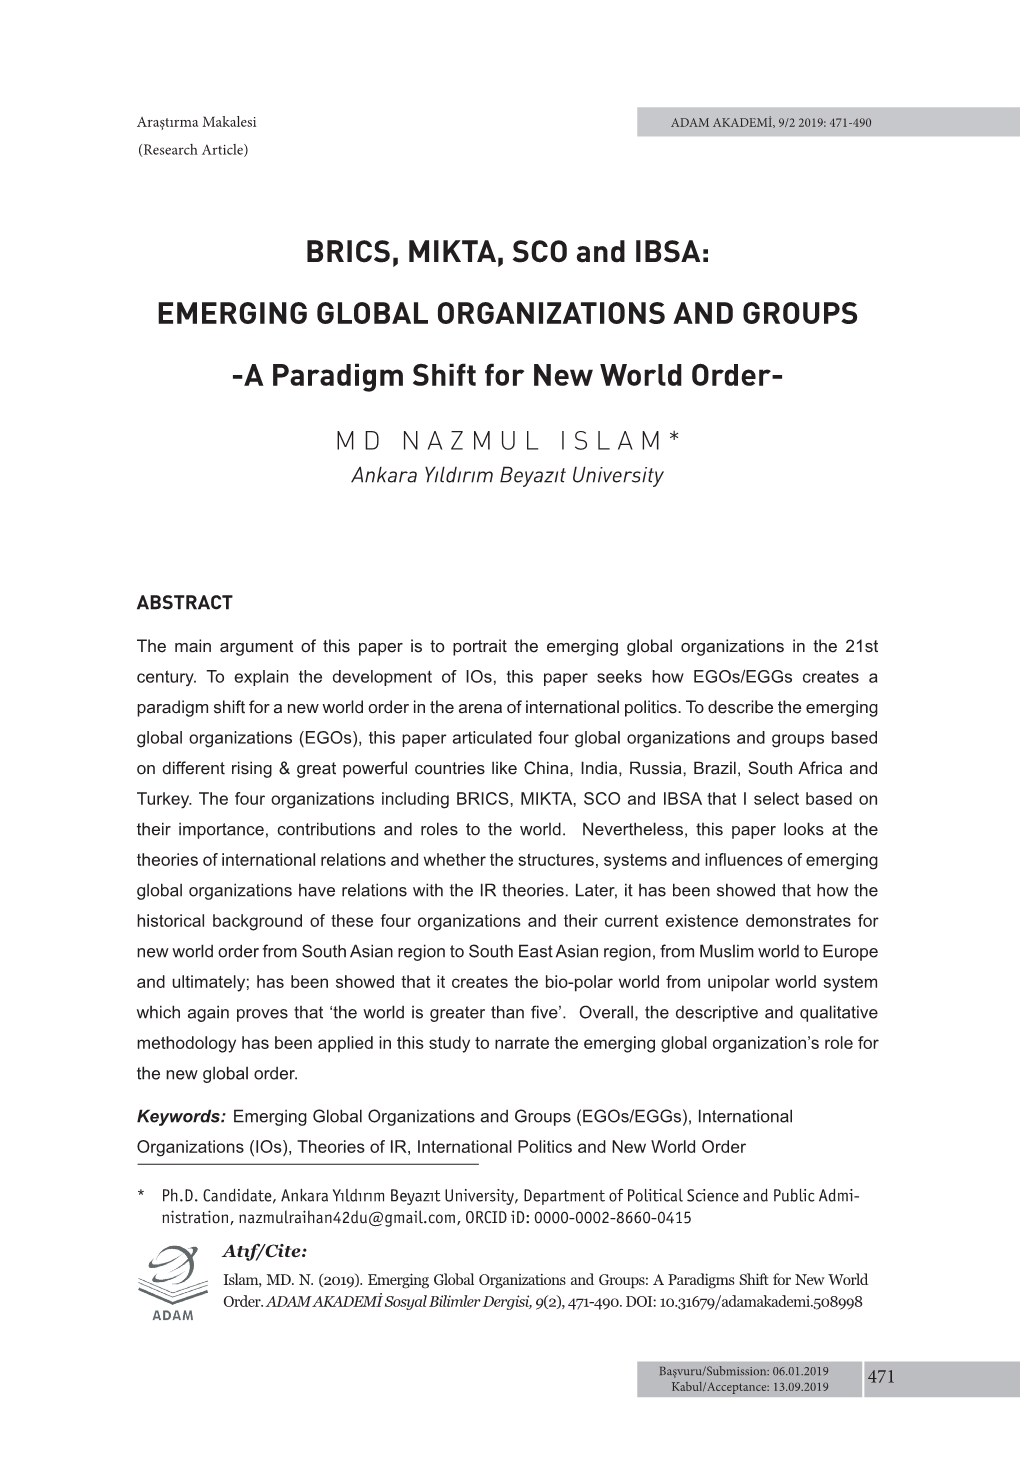 BRICS, MIKTA, SCO and IBSA: EMERGING GLOBAL ORGANIZATIONS and GROUPS -A Paradigm Shift for New World Order